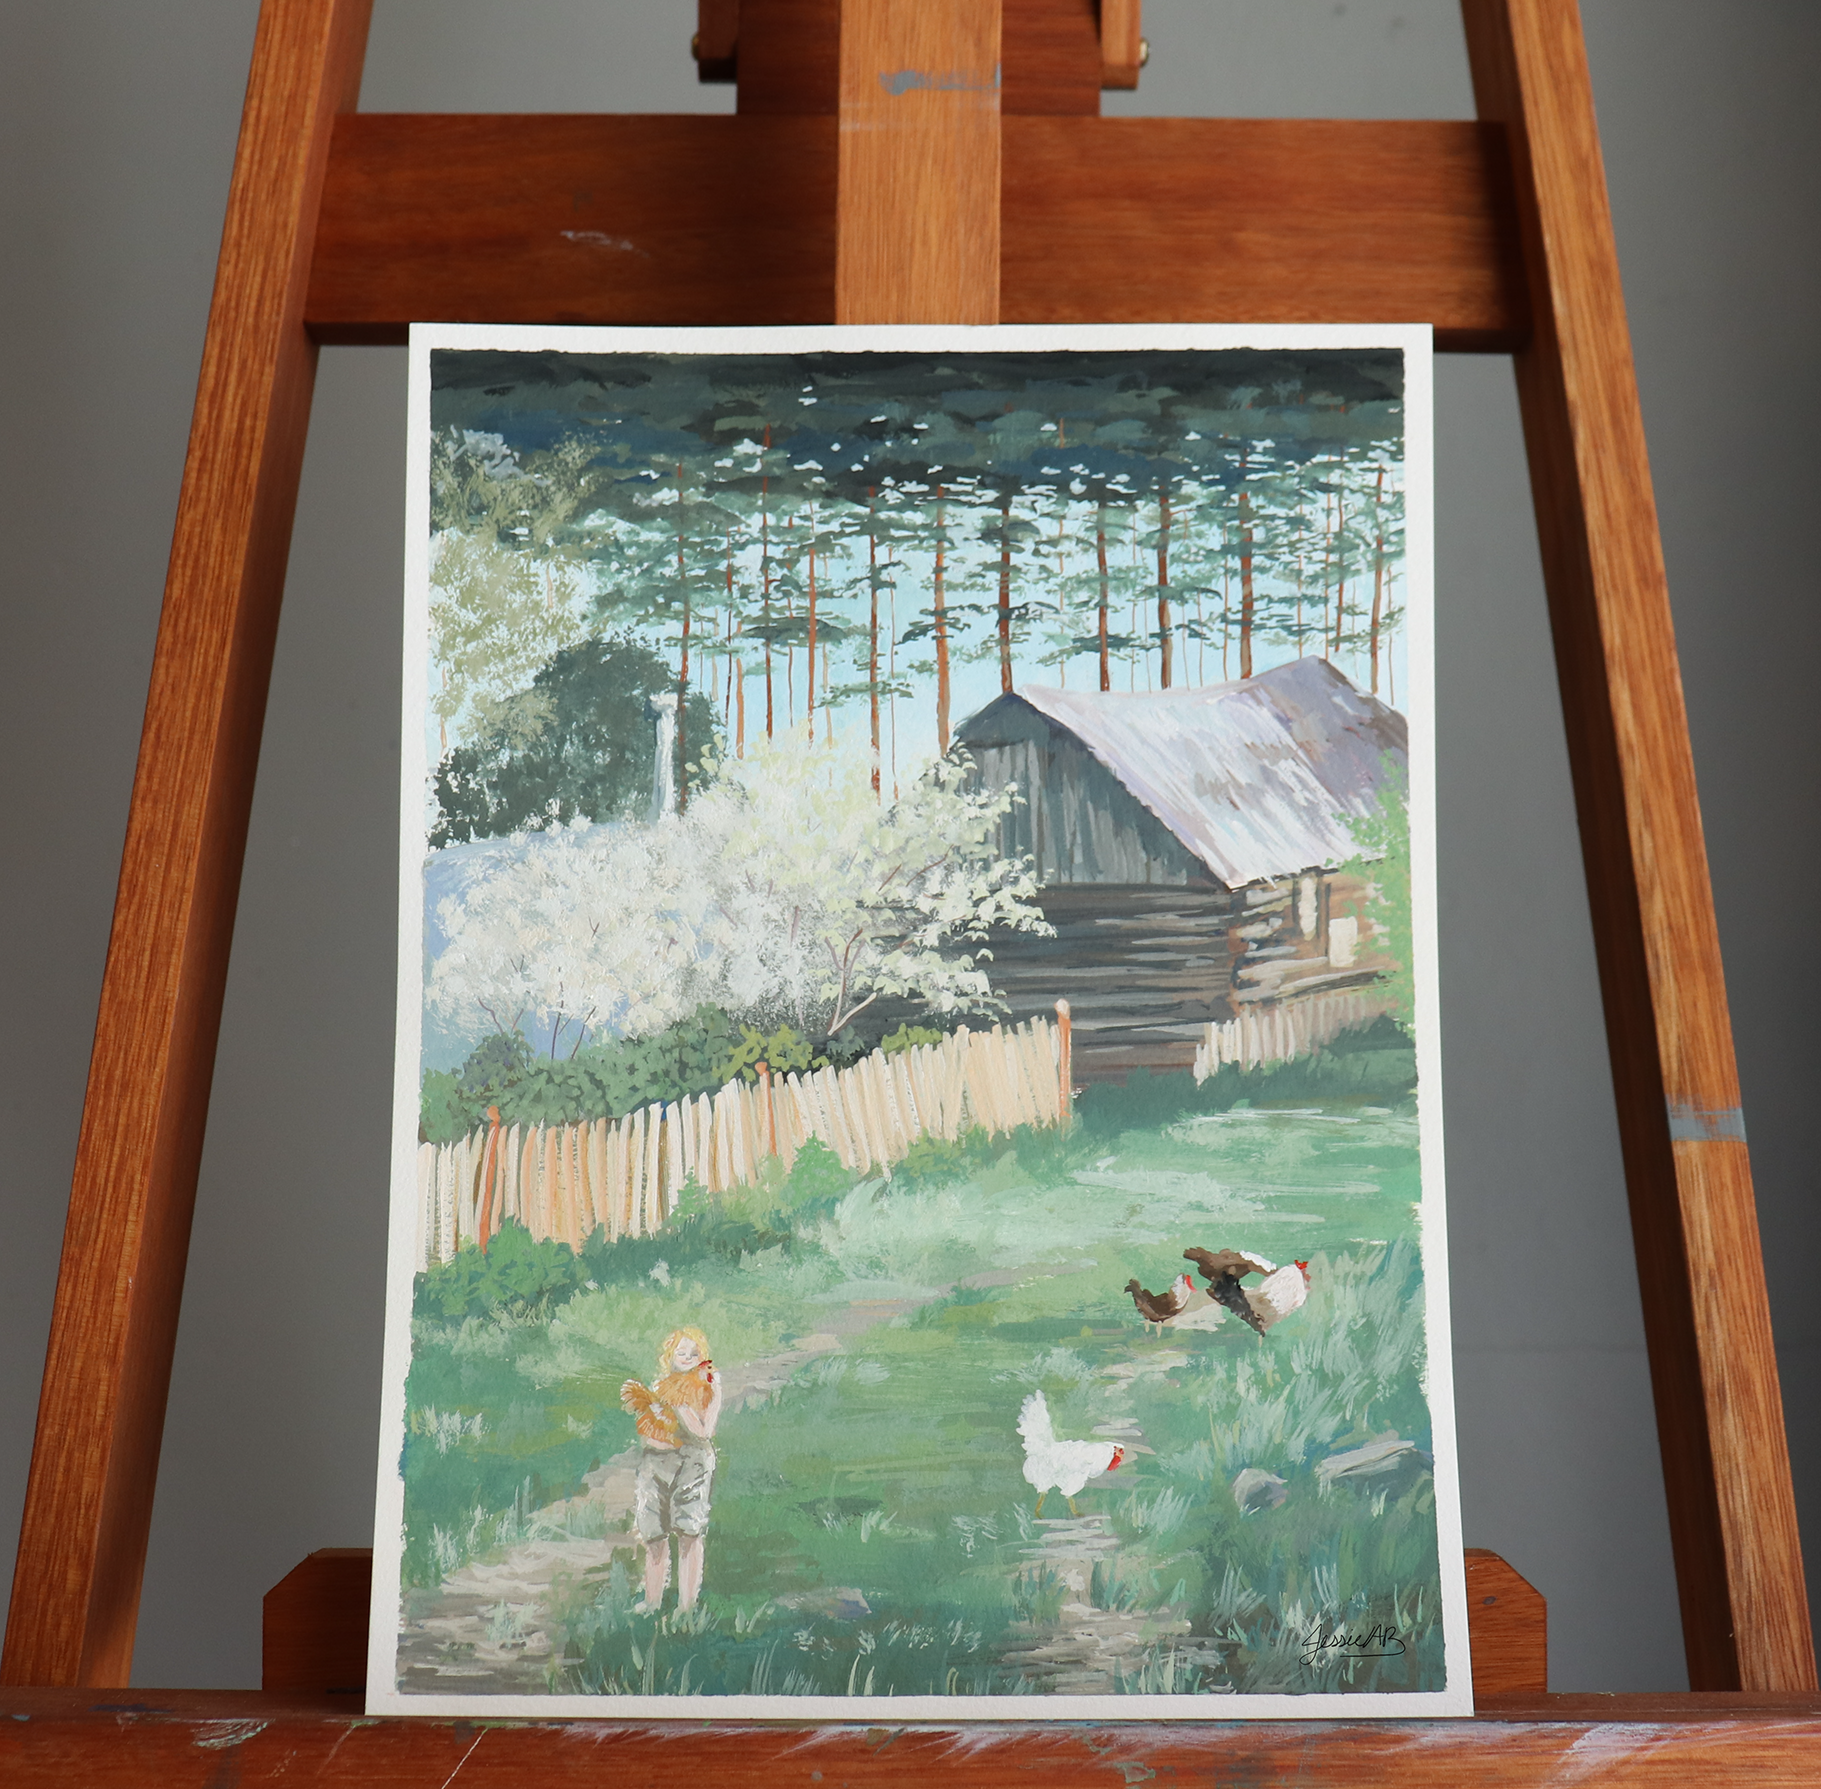 Original painting on my easel named "Rustic Oasis" in natural lighting